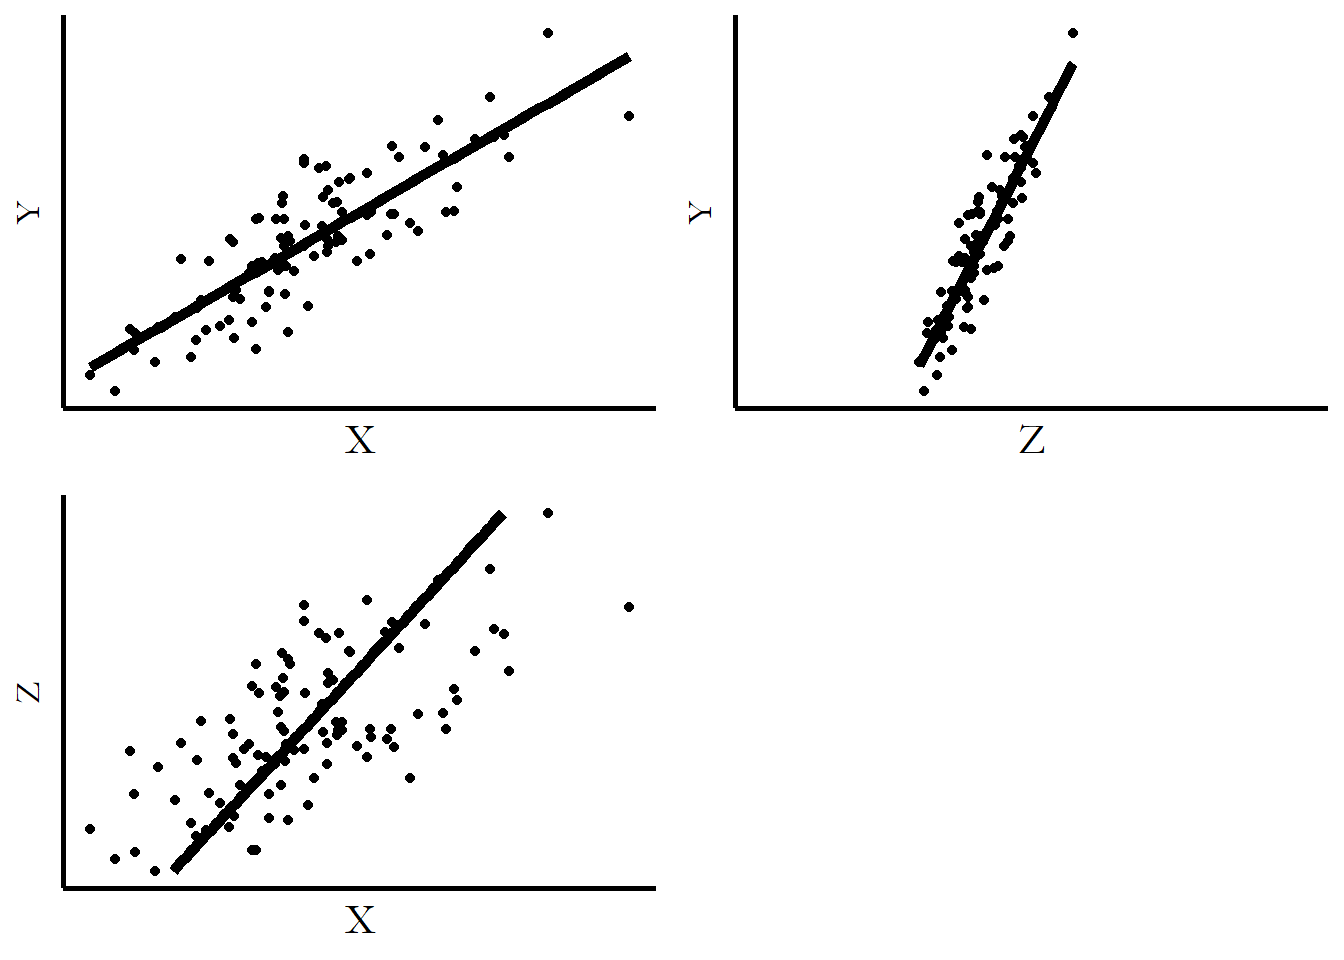 A set of three scatterplots with overlaid best-fit lines, each showing the relationship between Y and X, between Y and Z, and between X and Z, respectively